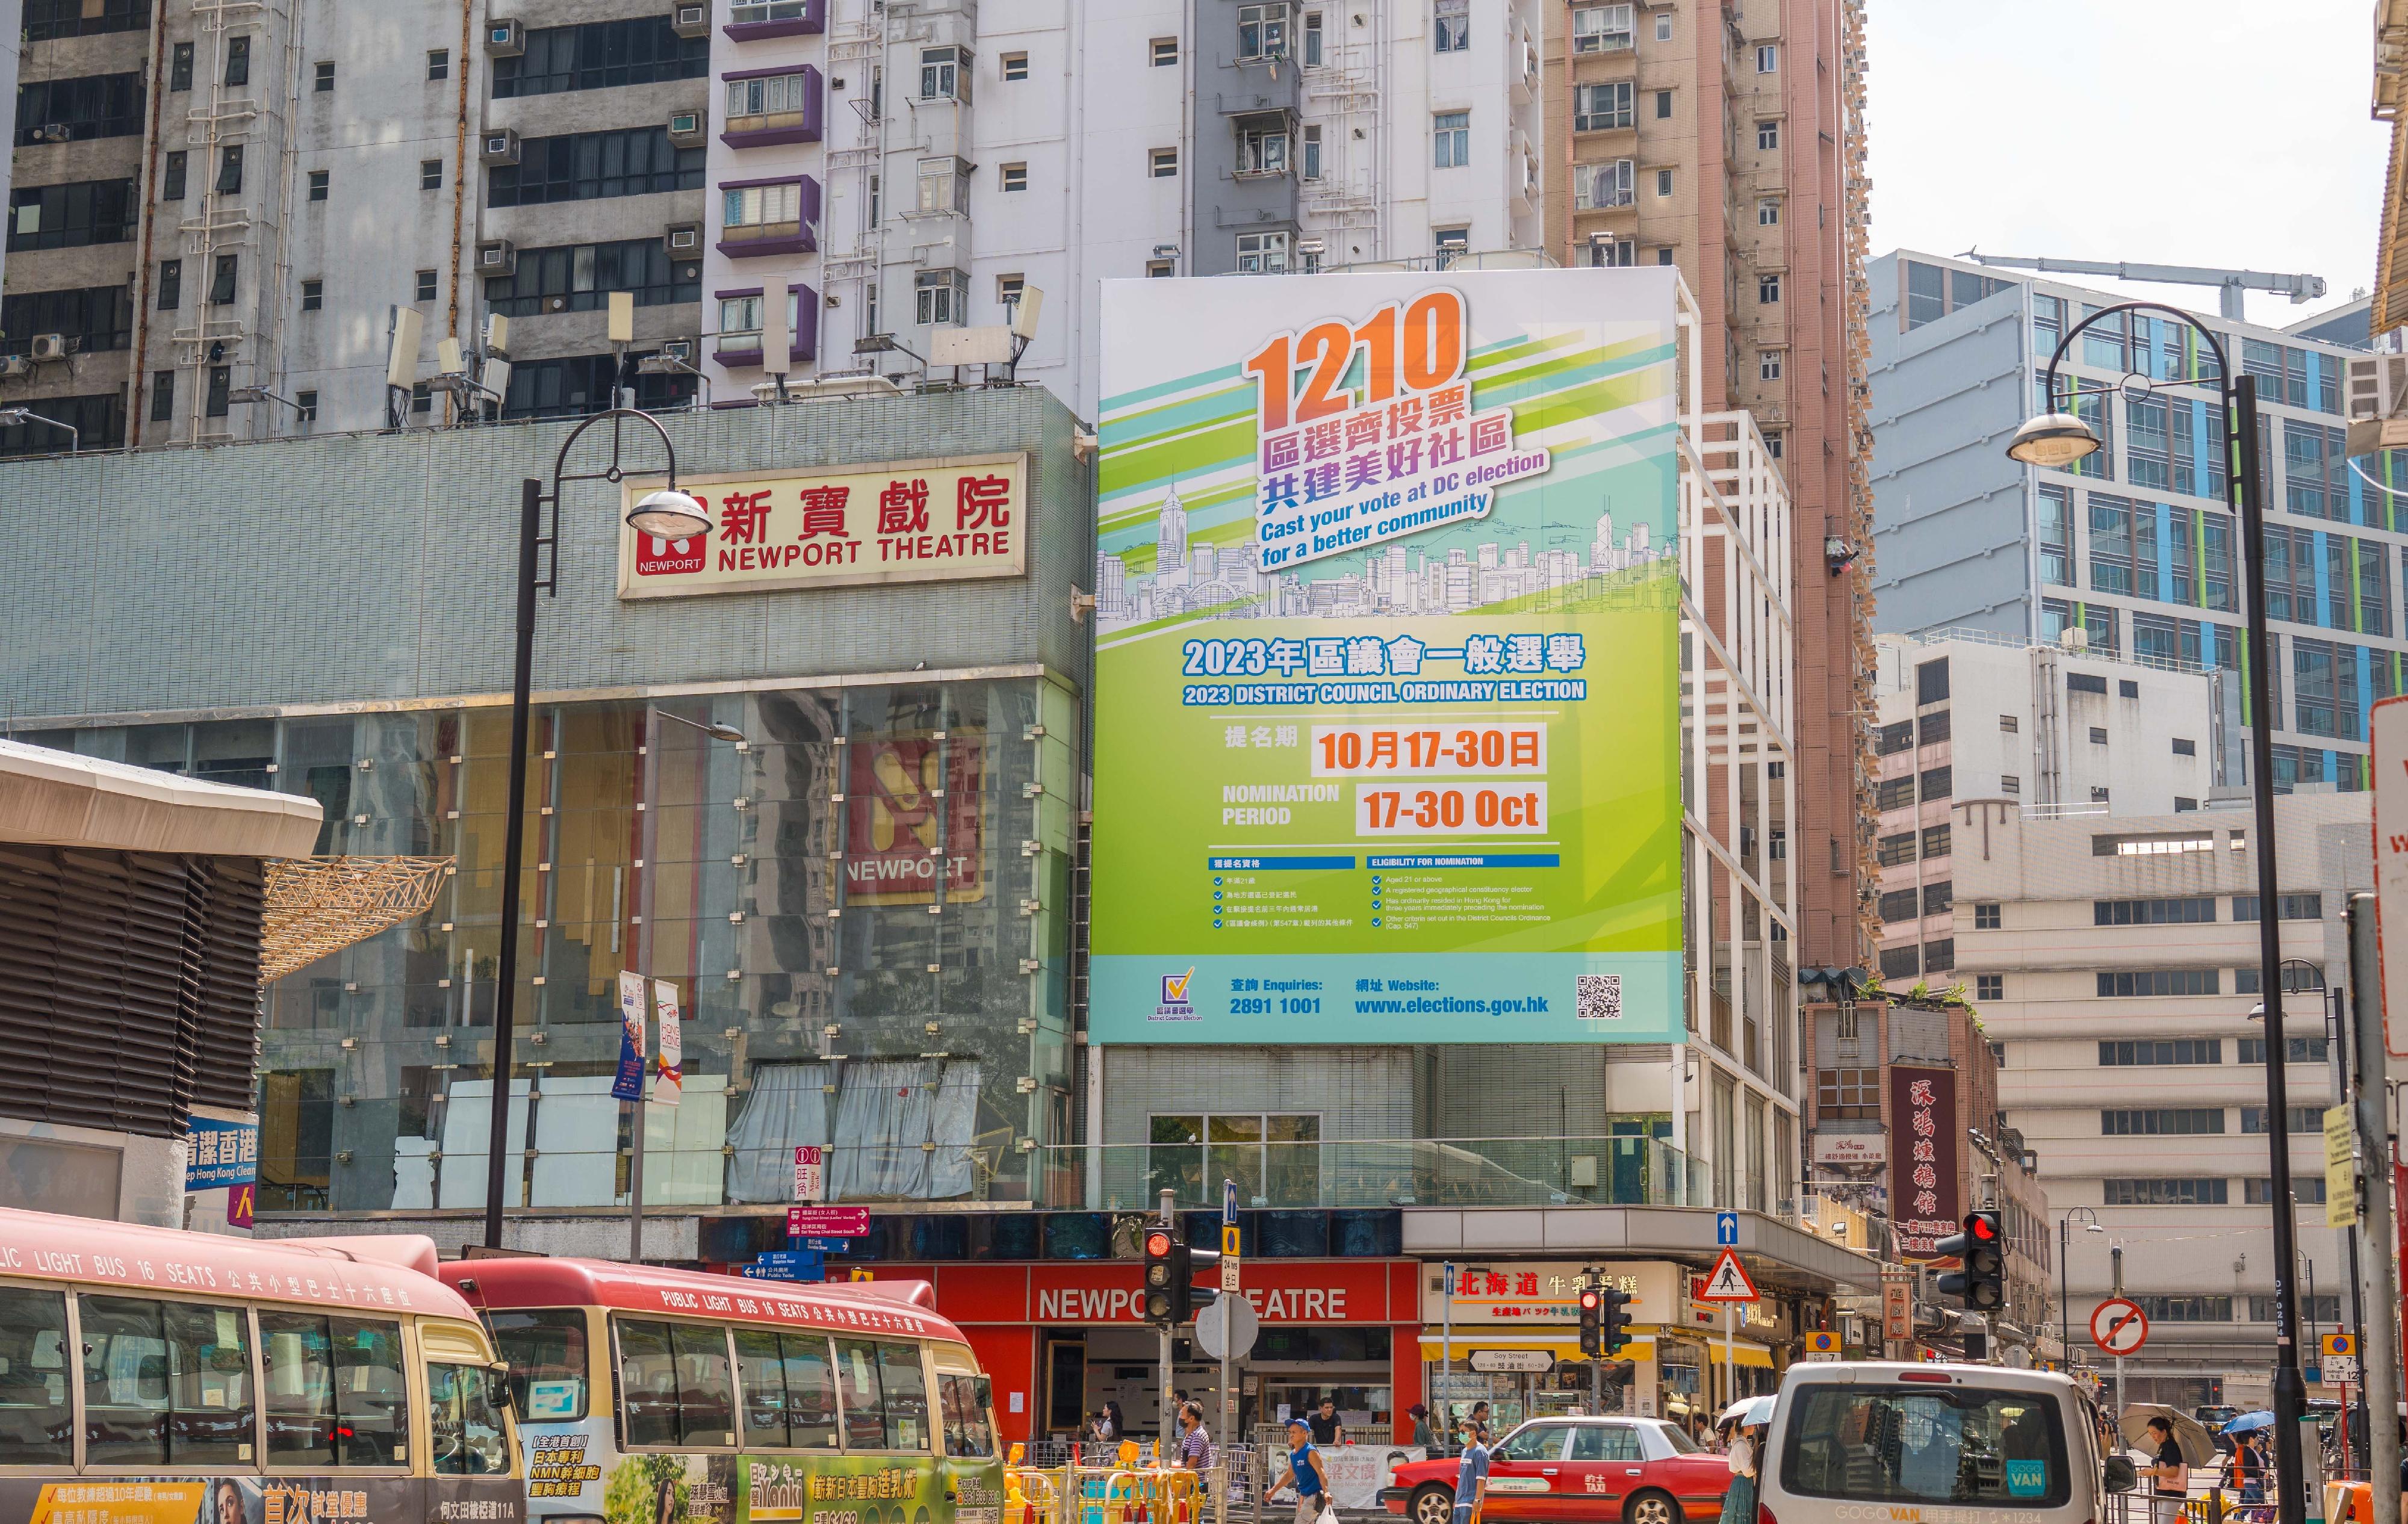 The 2023 District Council Ordinary Election will be held on December 10 (Sunday). The nomination period for the election started on October 17, and will continue until October 30. The Government has launched a publicity campaign for the nomination period that includes displays of giant banners in different districts.
